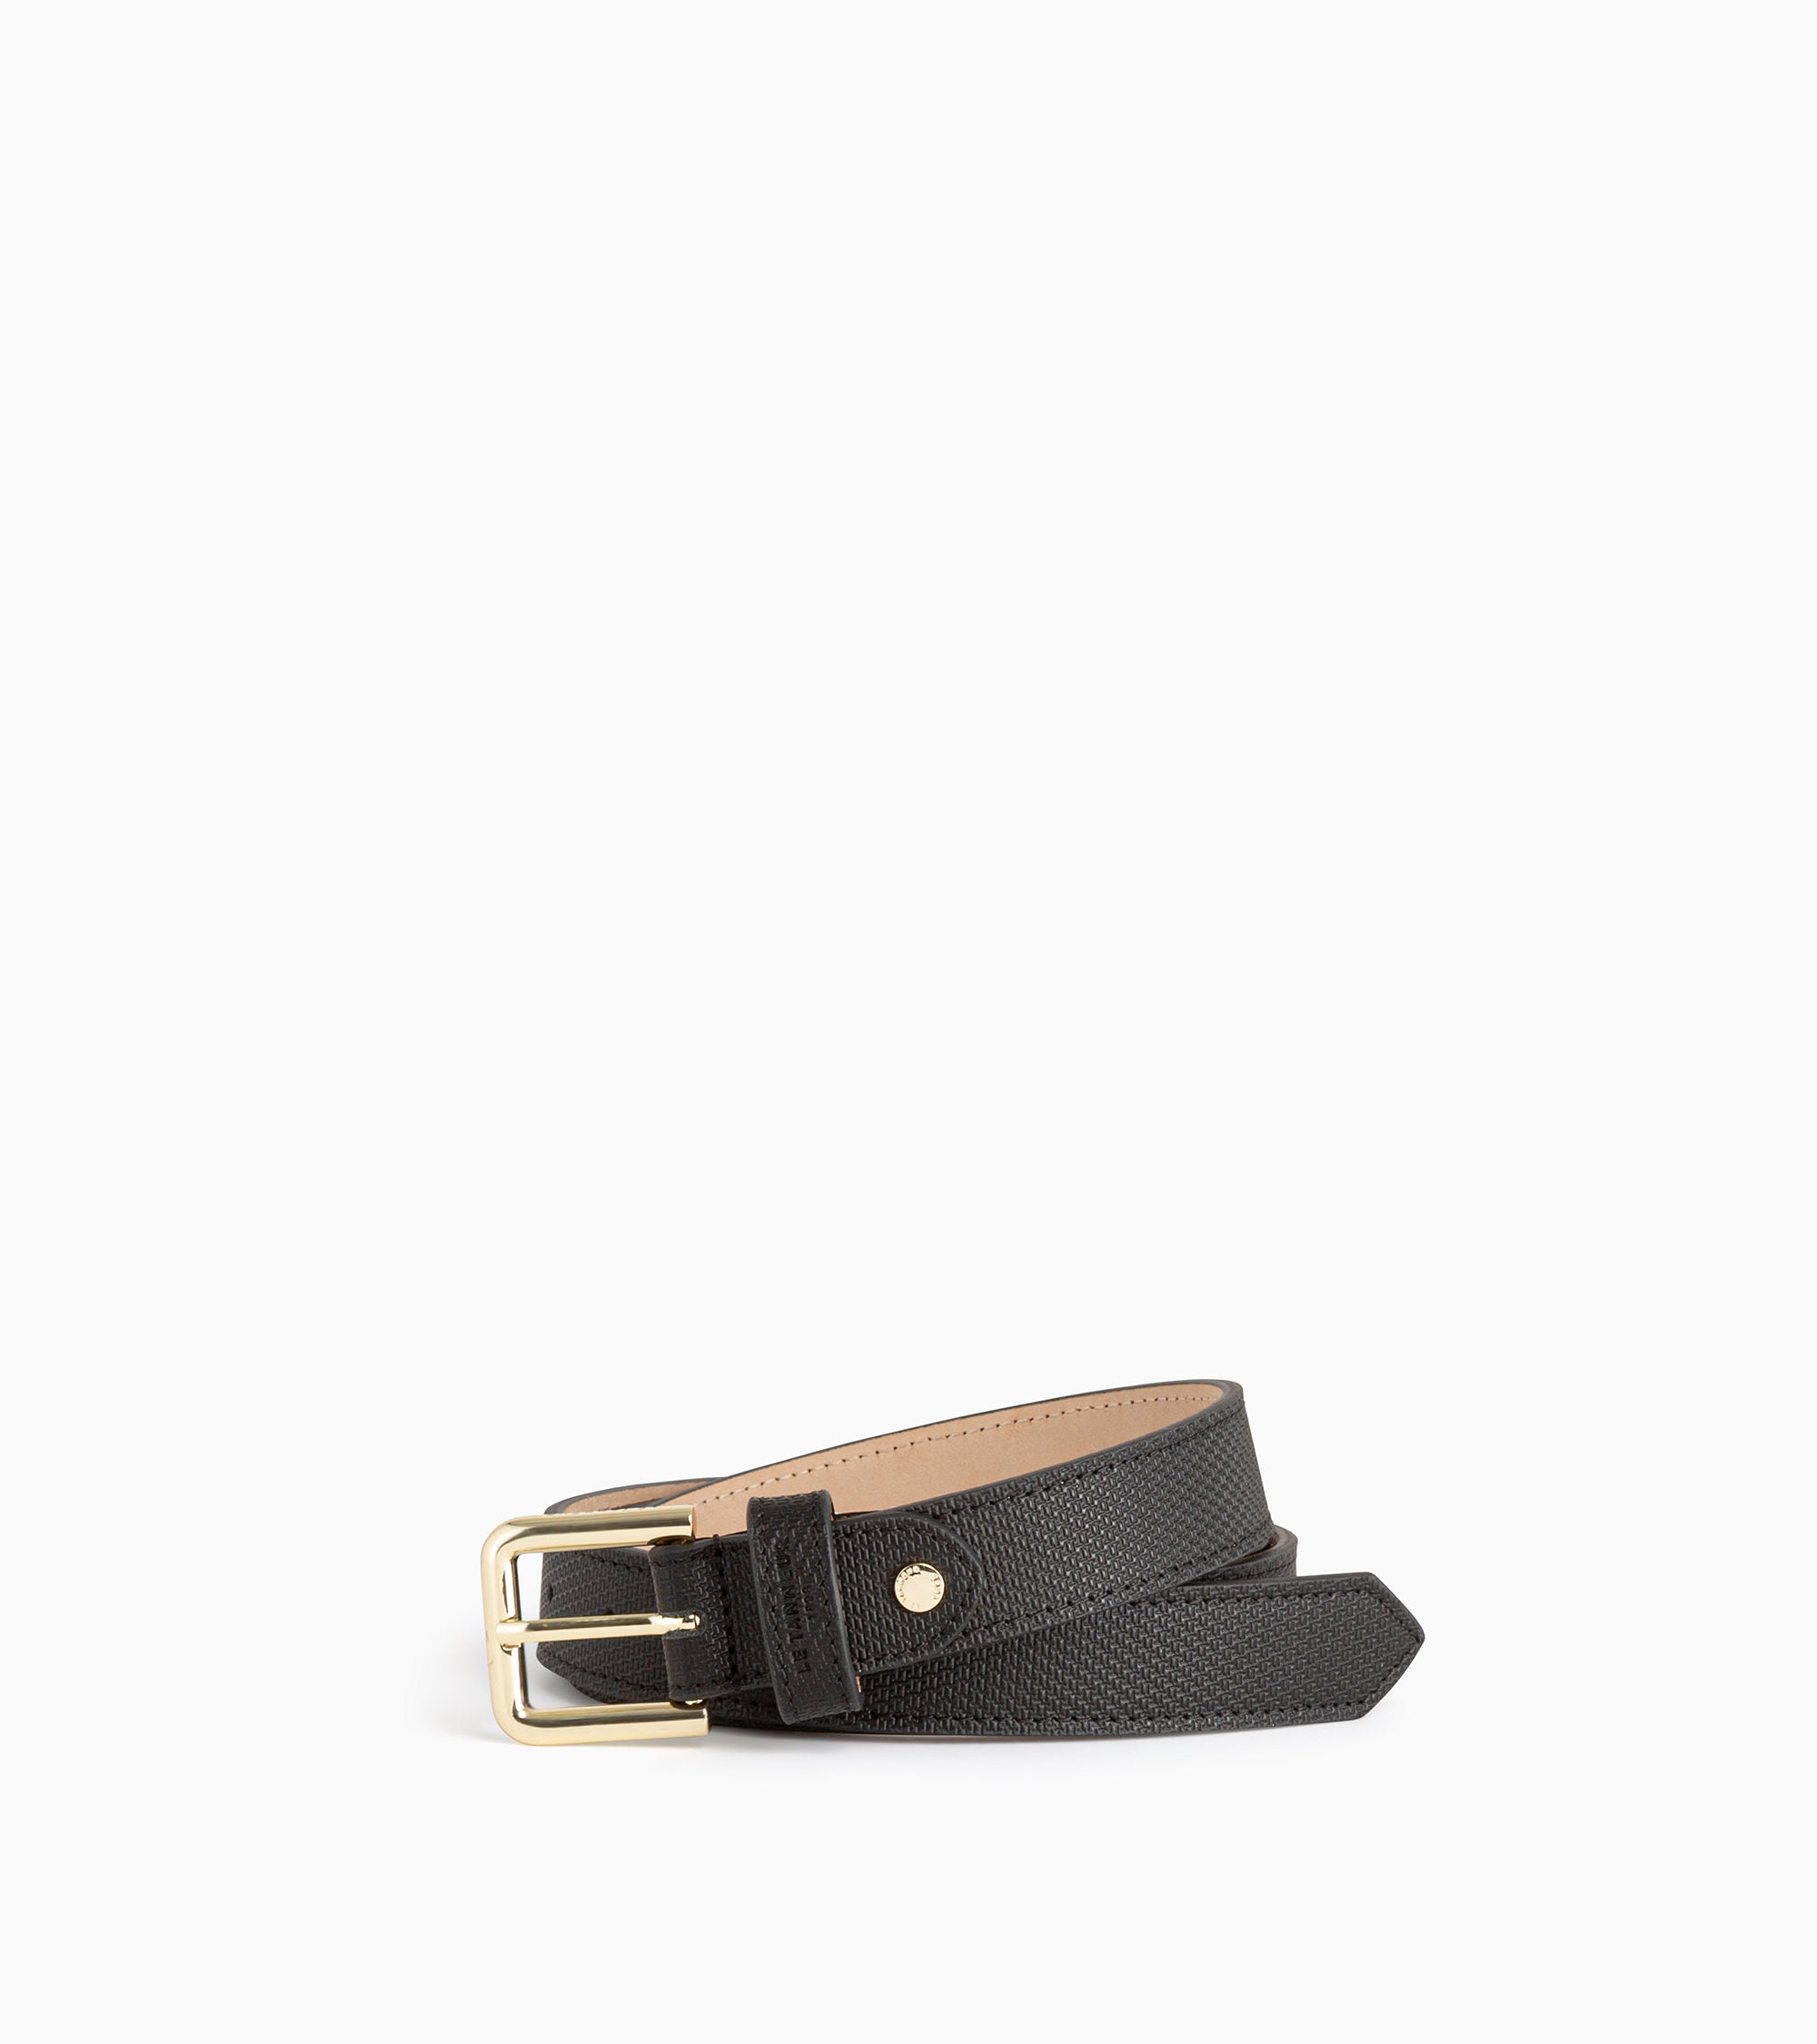 Women's belt with square buckle with T grain